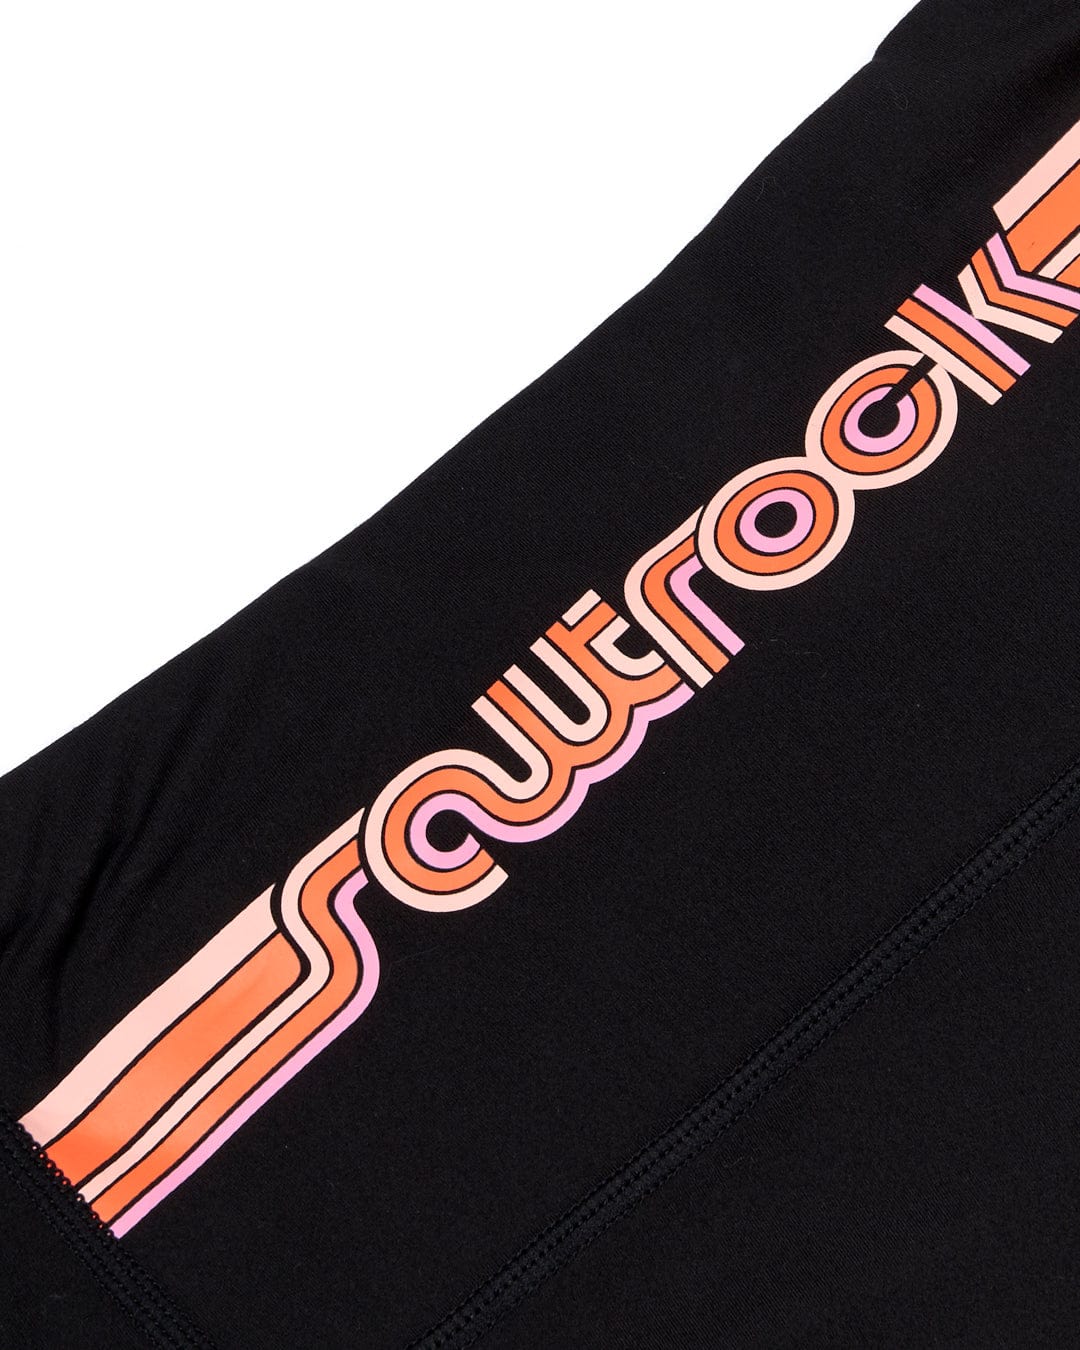 A pair of Saltrock Retro Ribbon - Womens Leggings in black with a retro print logo in pink and orange.